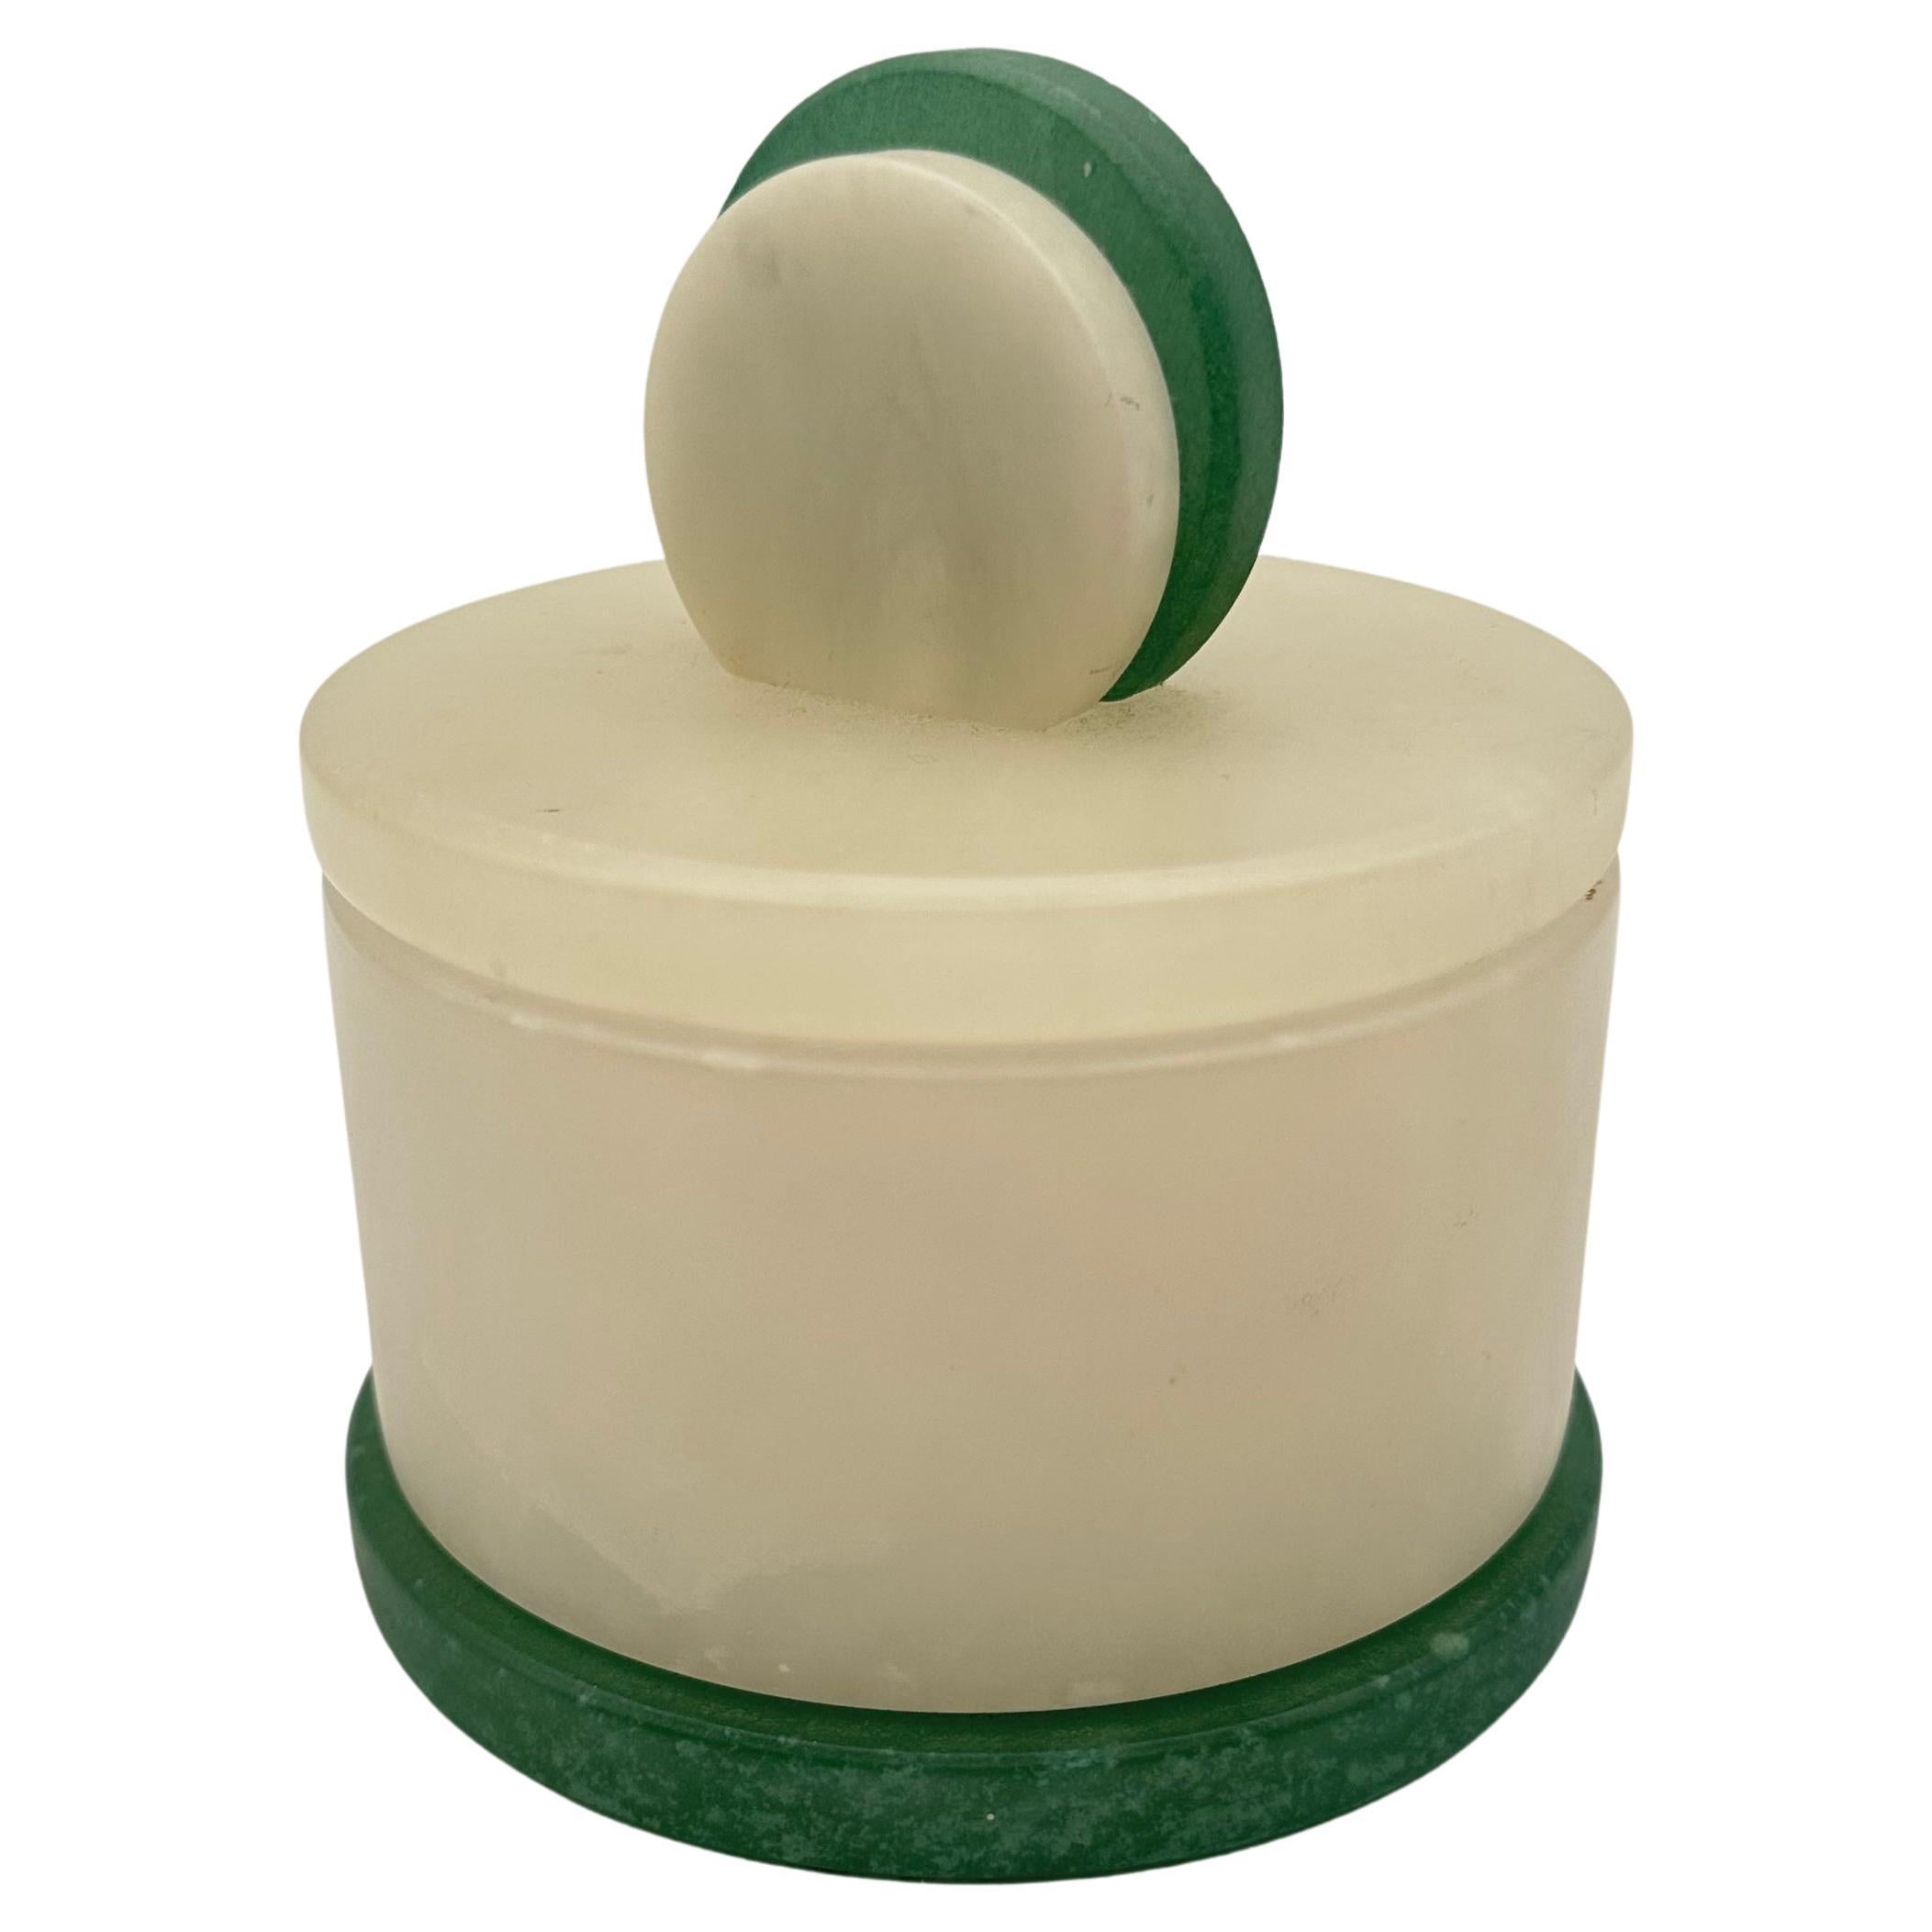 Vintage Art Deco Style Round Lidded Stone Box with White and Green 